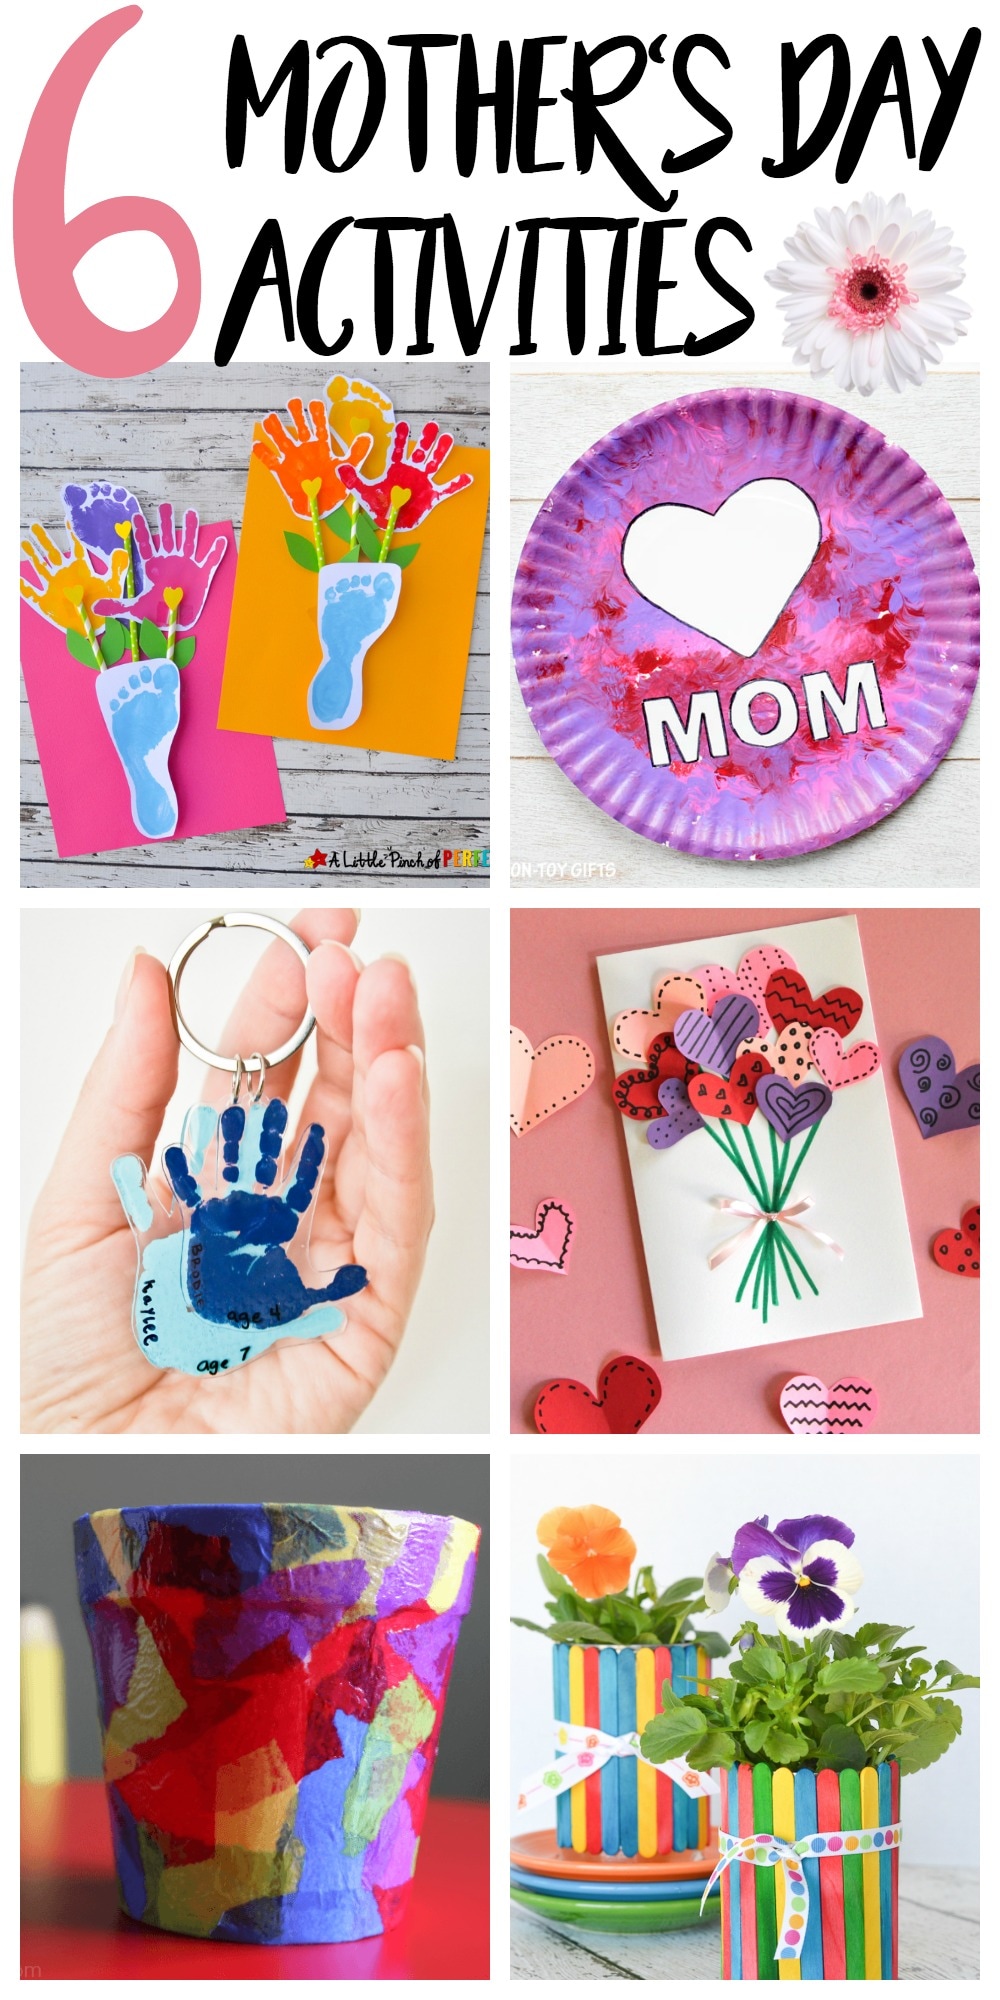 Mother's Day Crafts and Activities The Marketplace by Liv & Co. A